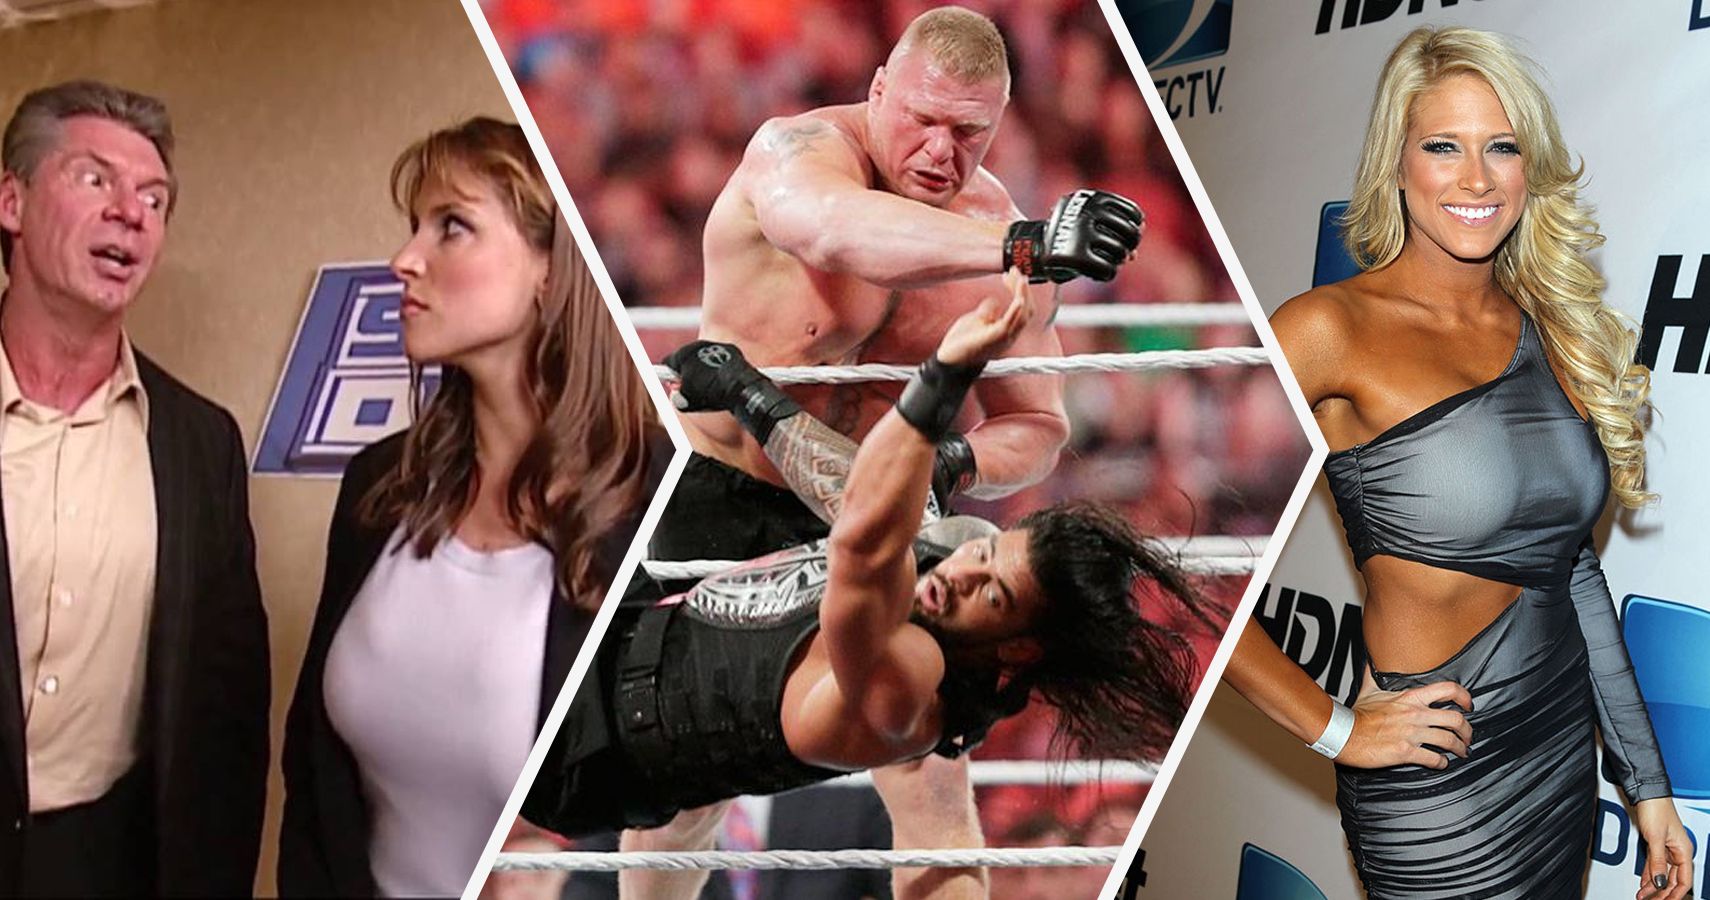 15 Behind-The-Scenes Secrets Only Wrestling Superfans Know About The WWE